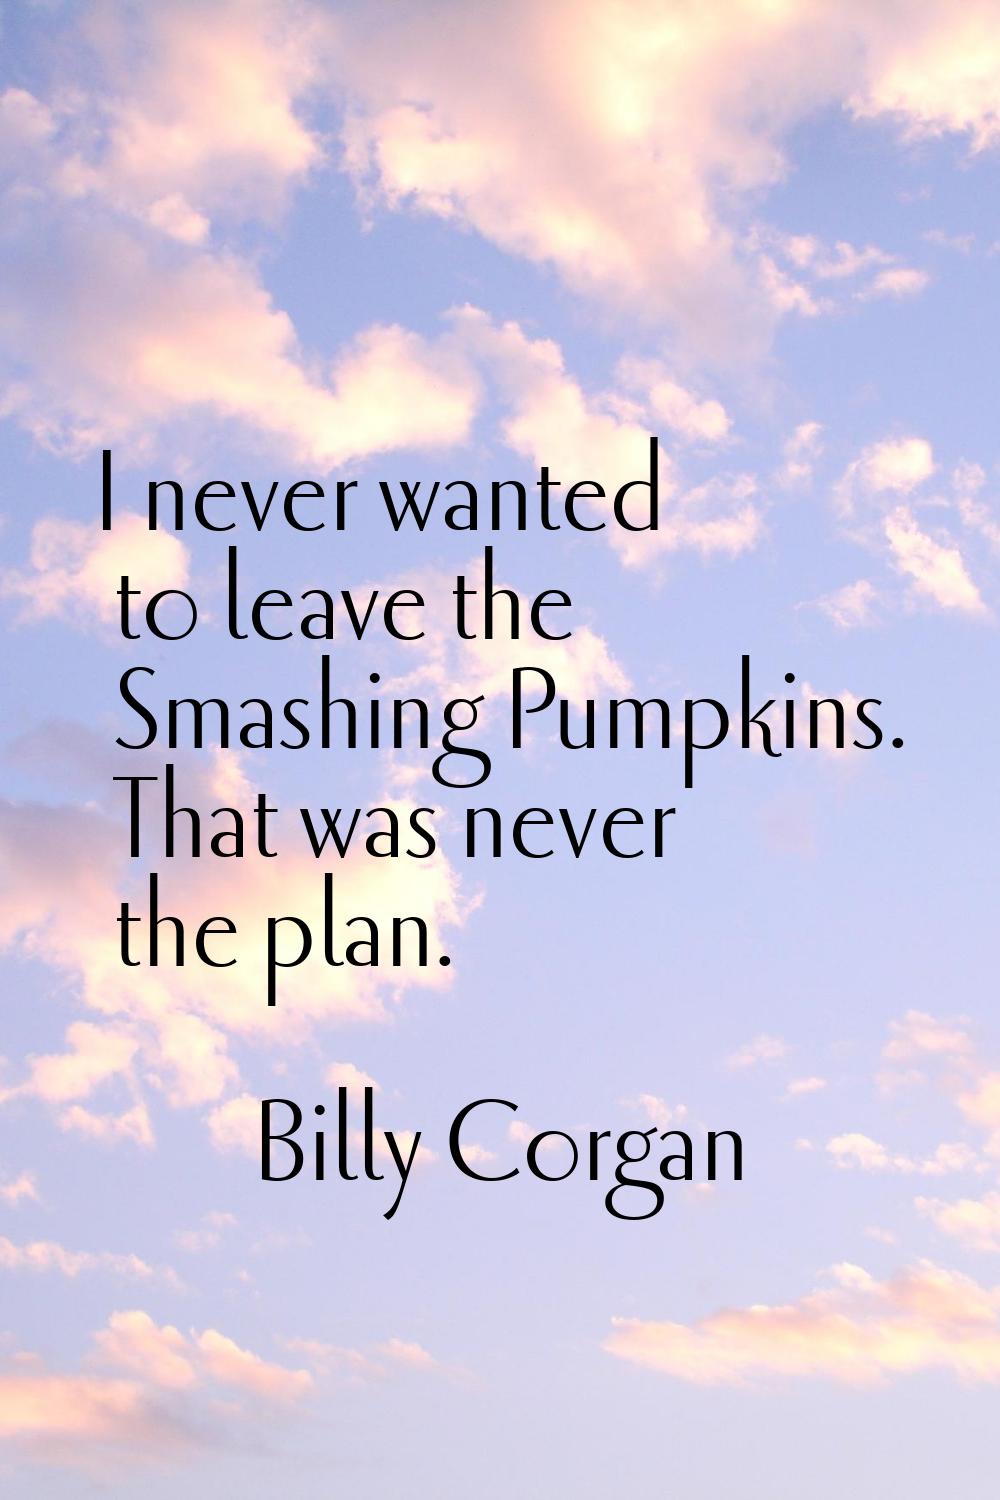 I never wanted to leave the Smashing Pumpkins. That was never the plan.